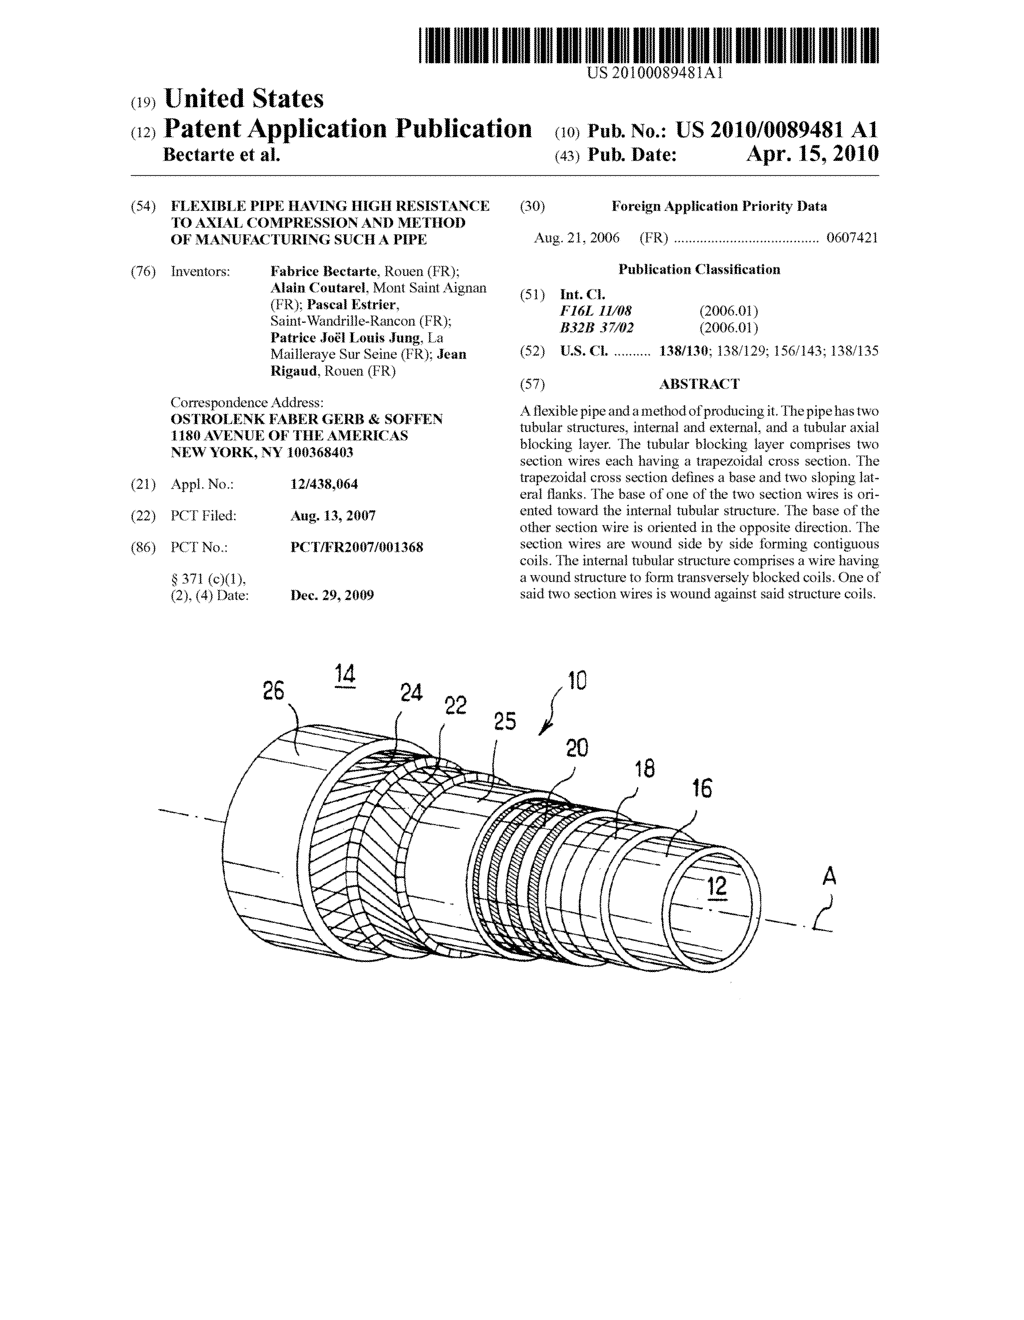 FLEXIBLE PIPE HAVING HIGH RESISTANCE TO AXIAL COMPRESSION AND METHOD OF MANUFACTURING SUCH A PIPE - diagram, schematic, and image 01